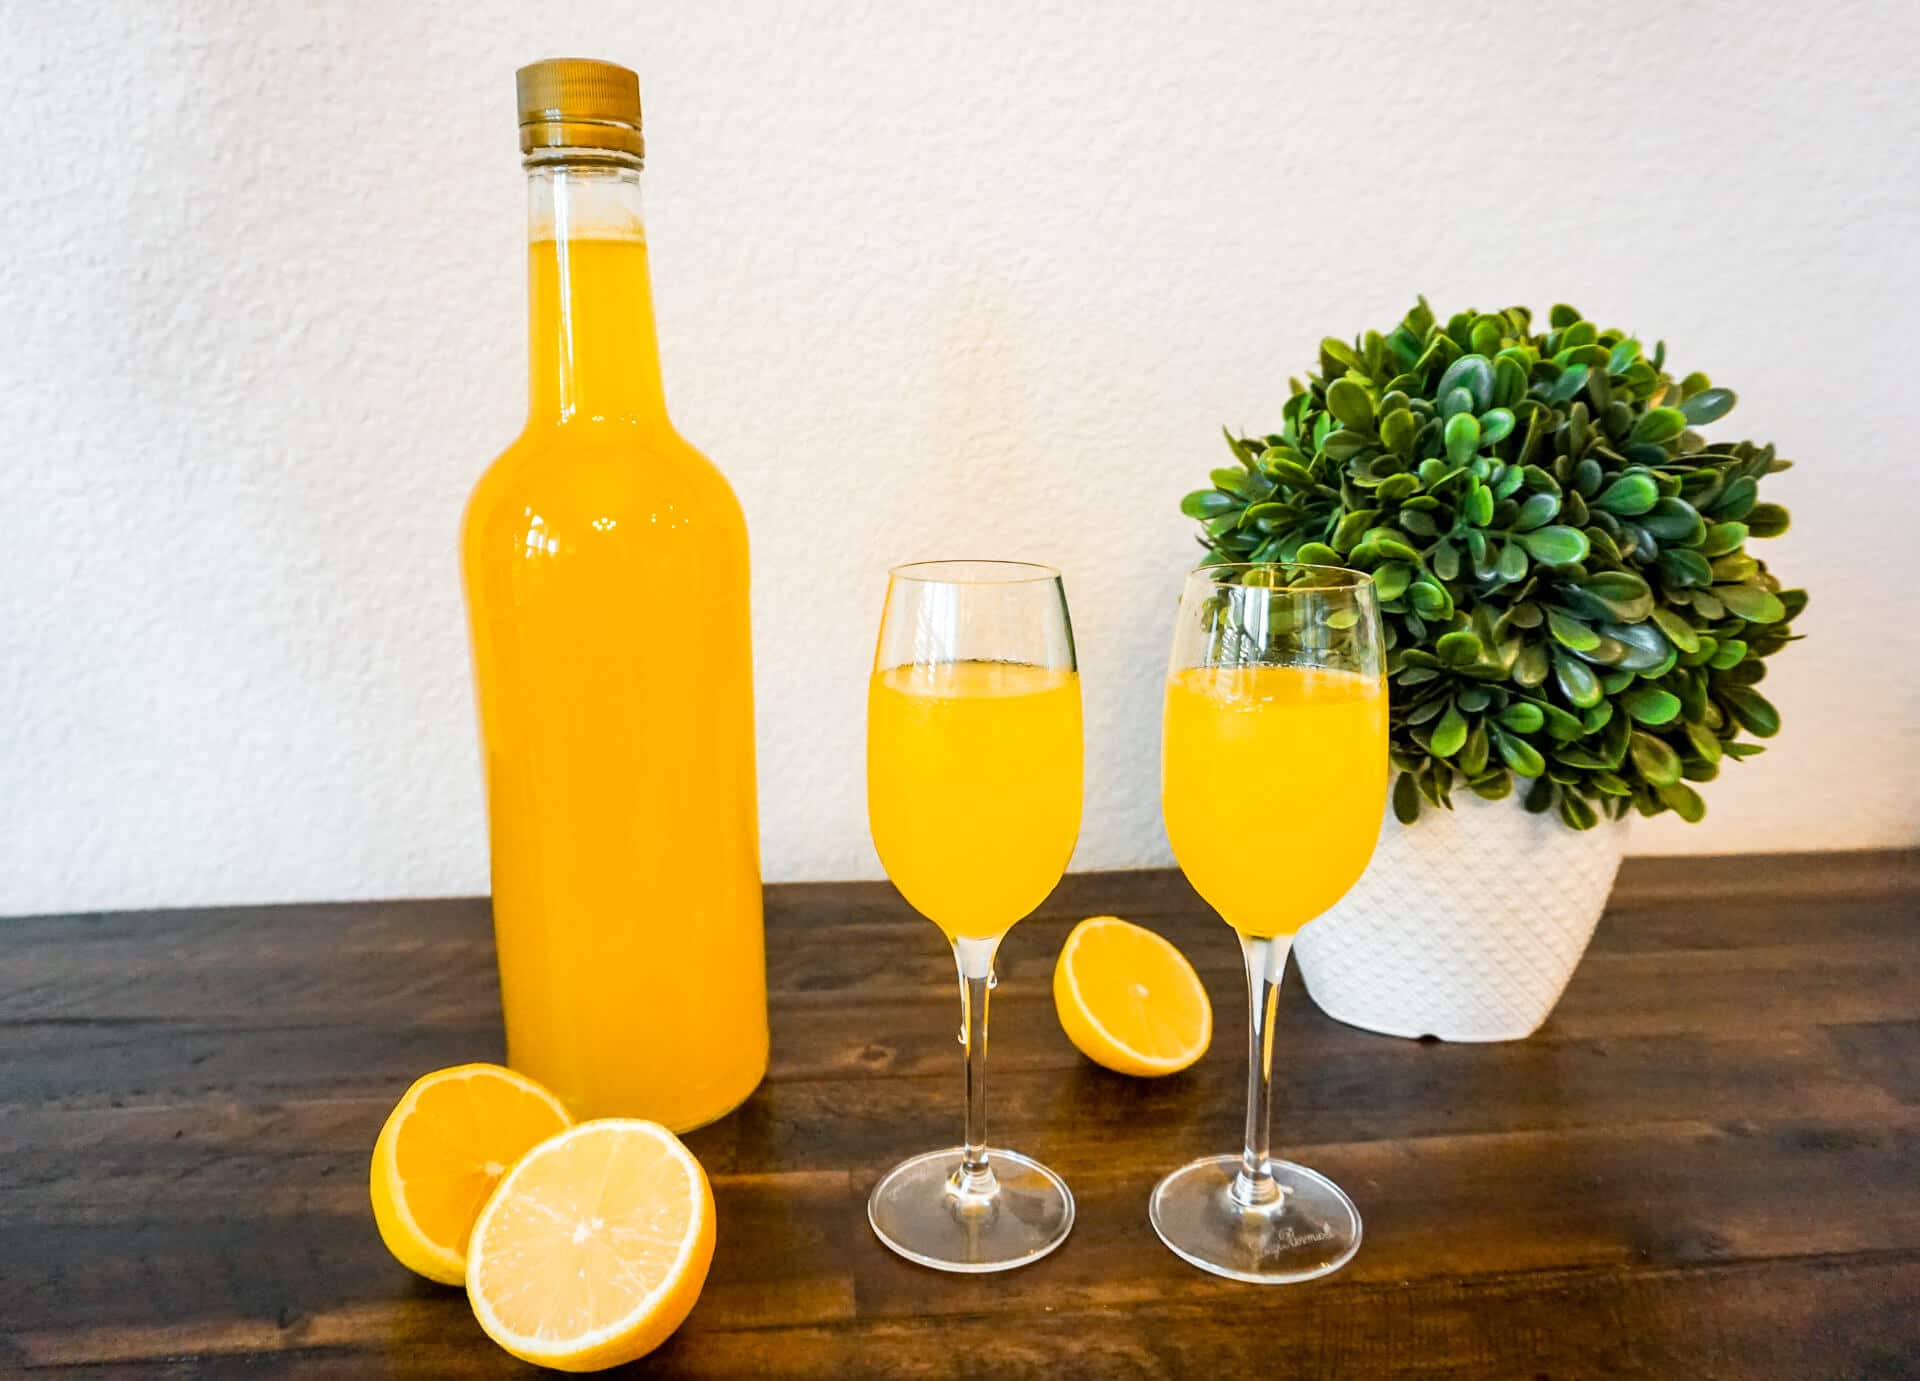 How To Store Homemade Limoncello